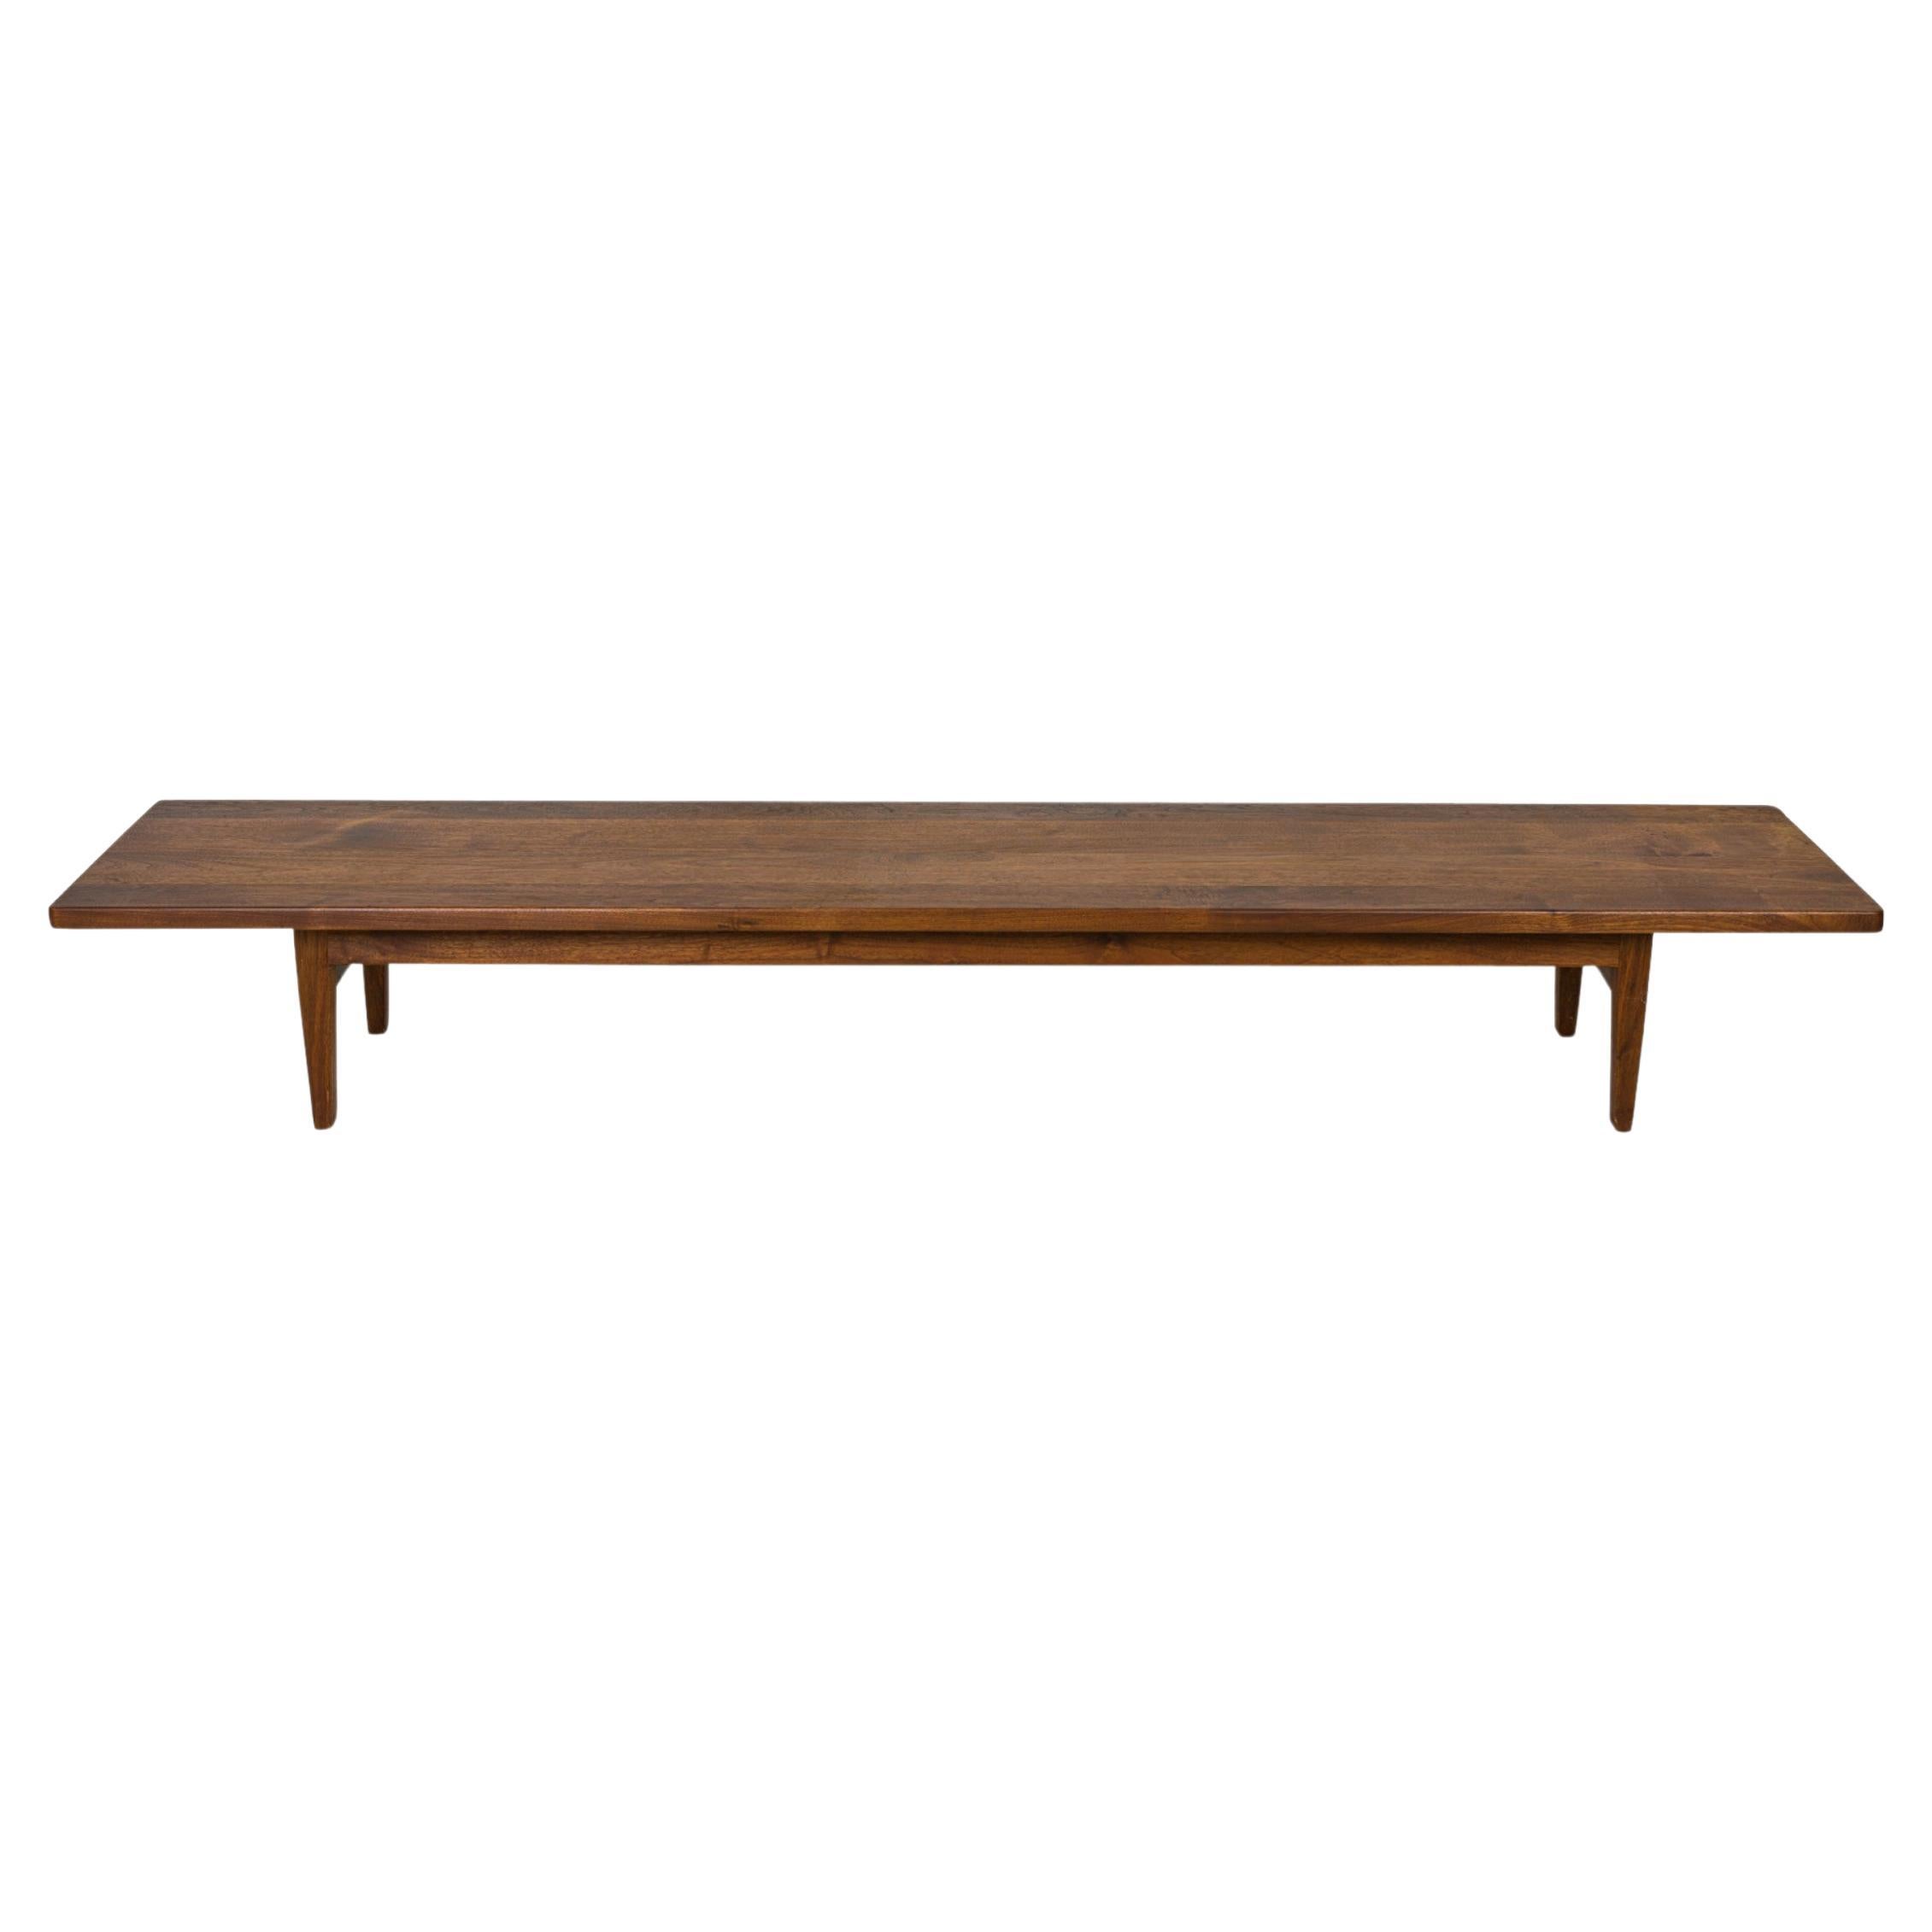 Arden Riddle American Mid-Century Wooden Low Table